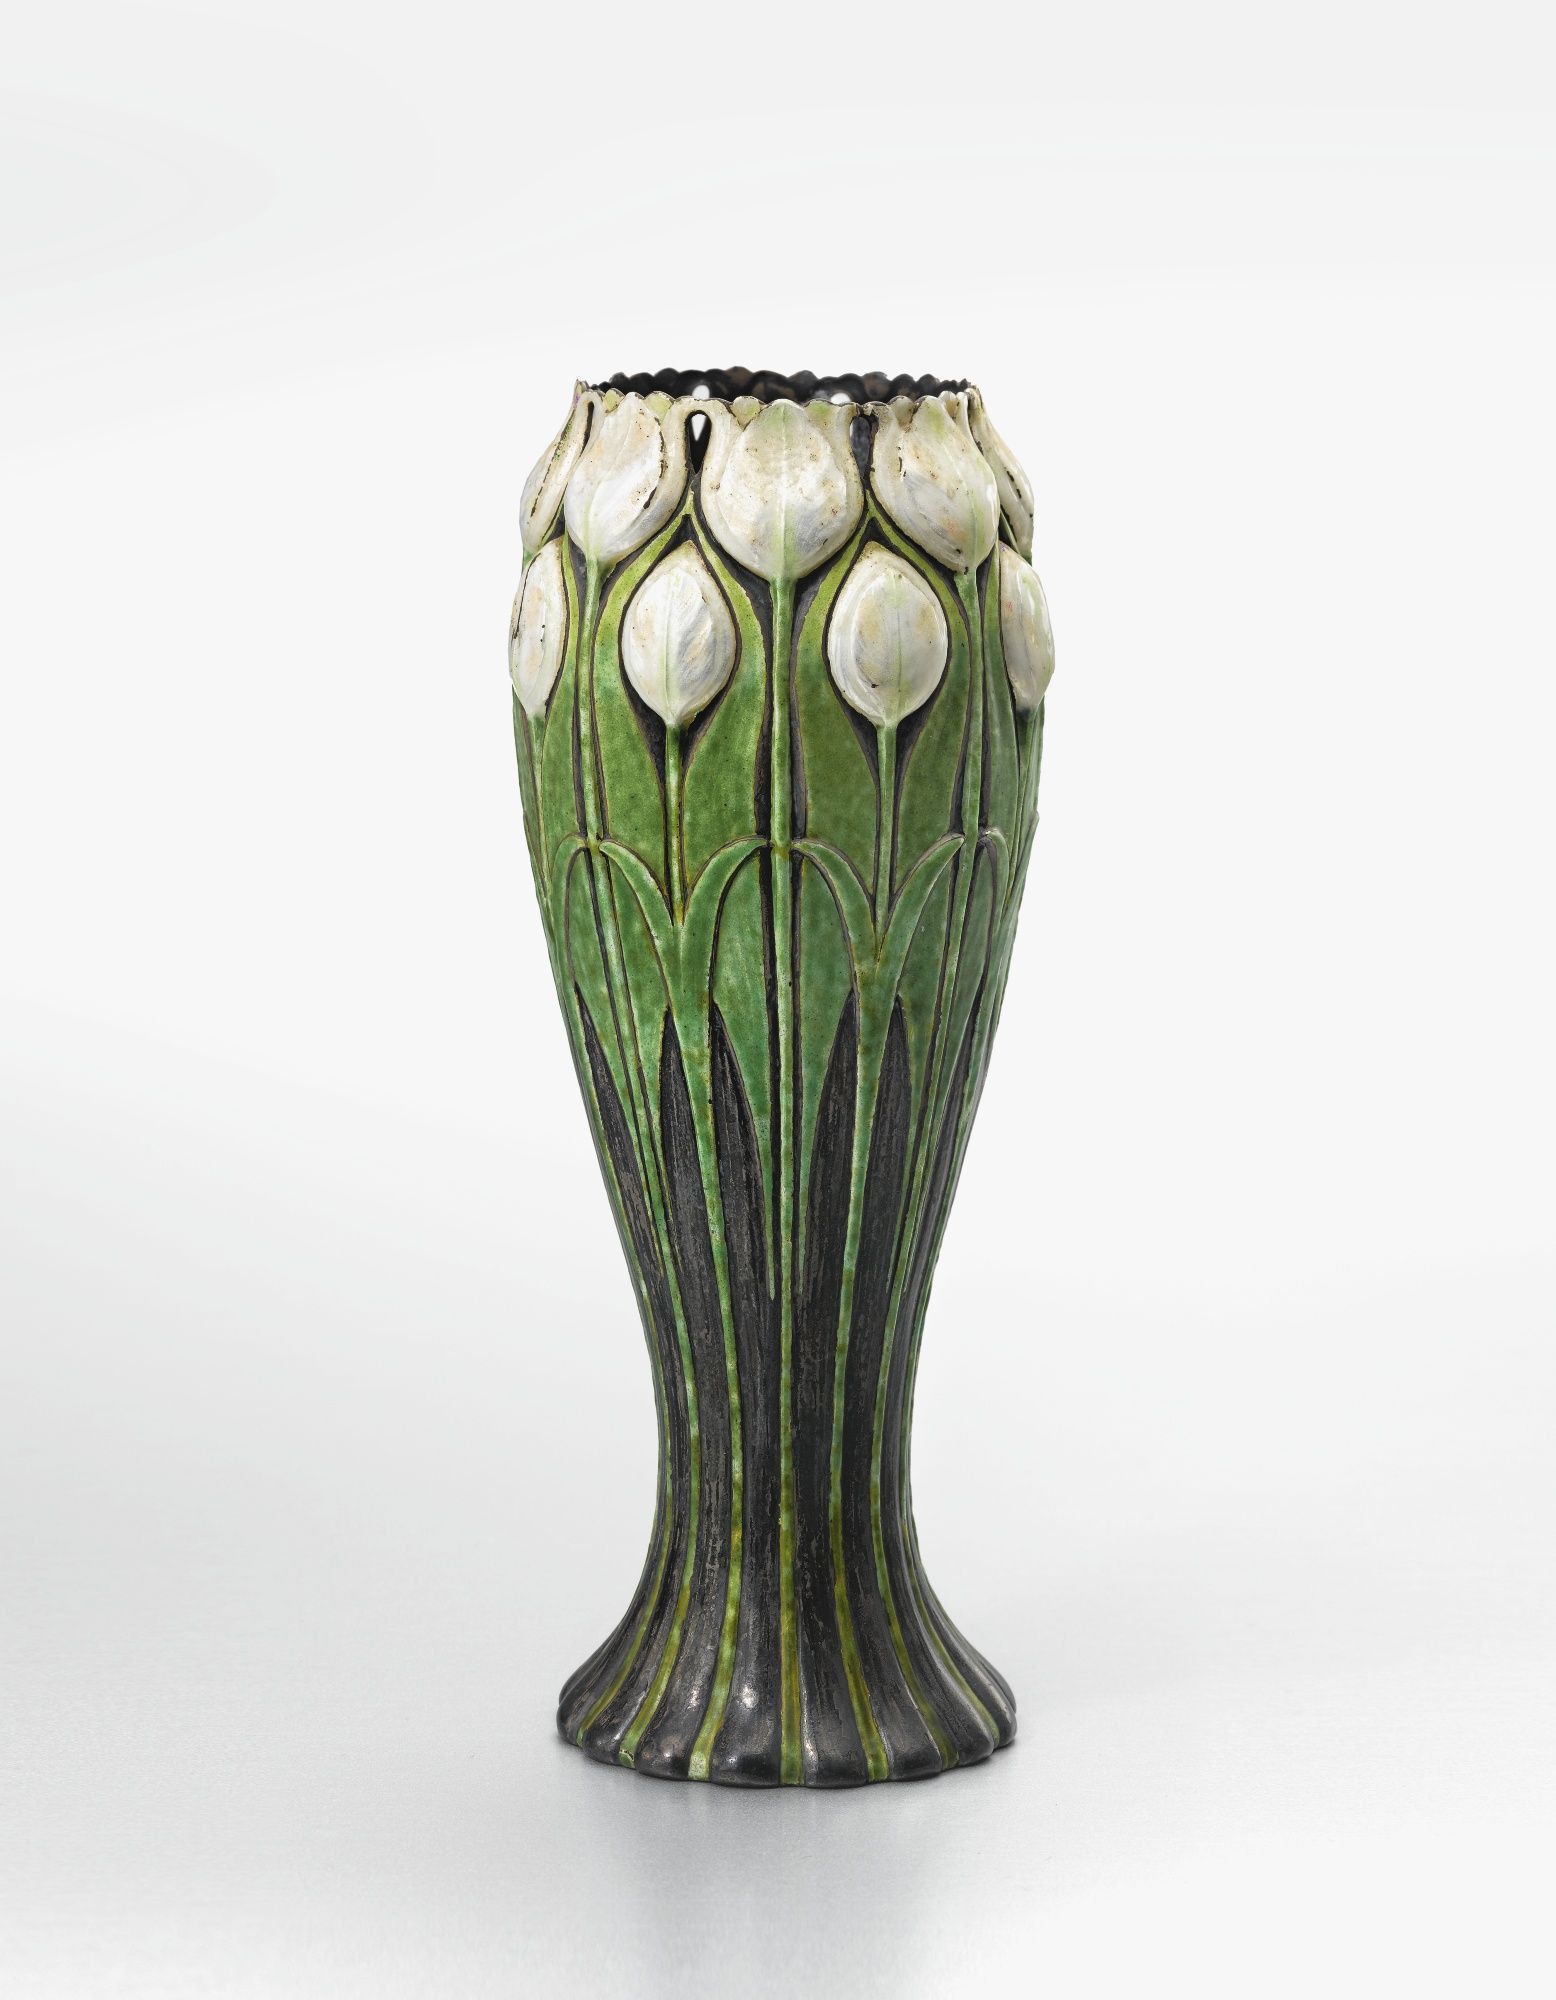 20 Elegant Lalique Vases Images 2024 free download lalique vases images of crystal vase prices images lalique luxembourg crystal bowl lalique intended for crystal vase prices images tiffany co tulip vase impressed tiffany co makers